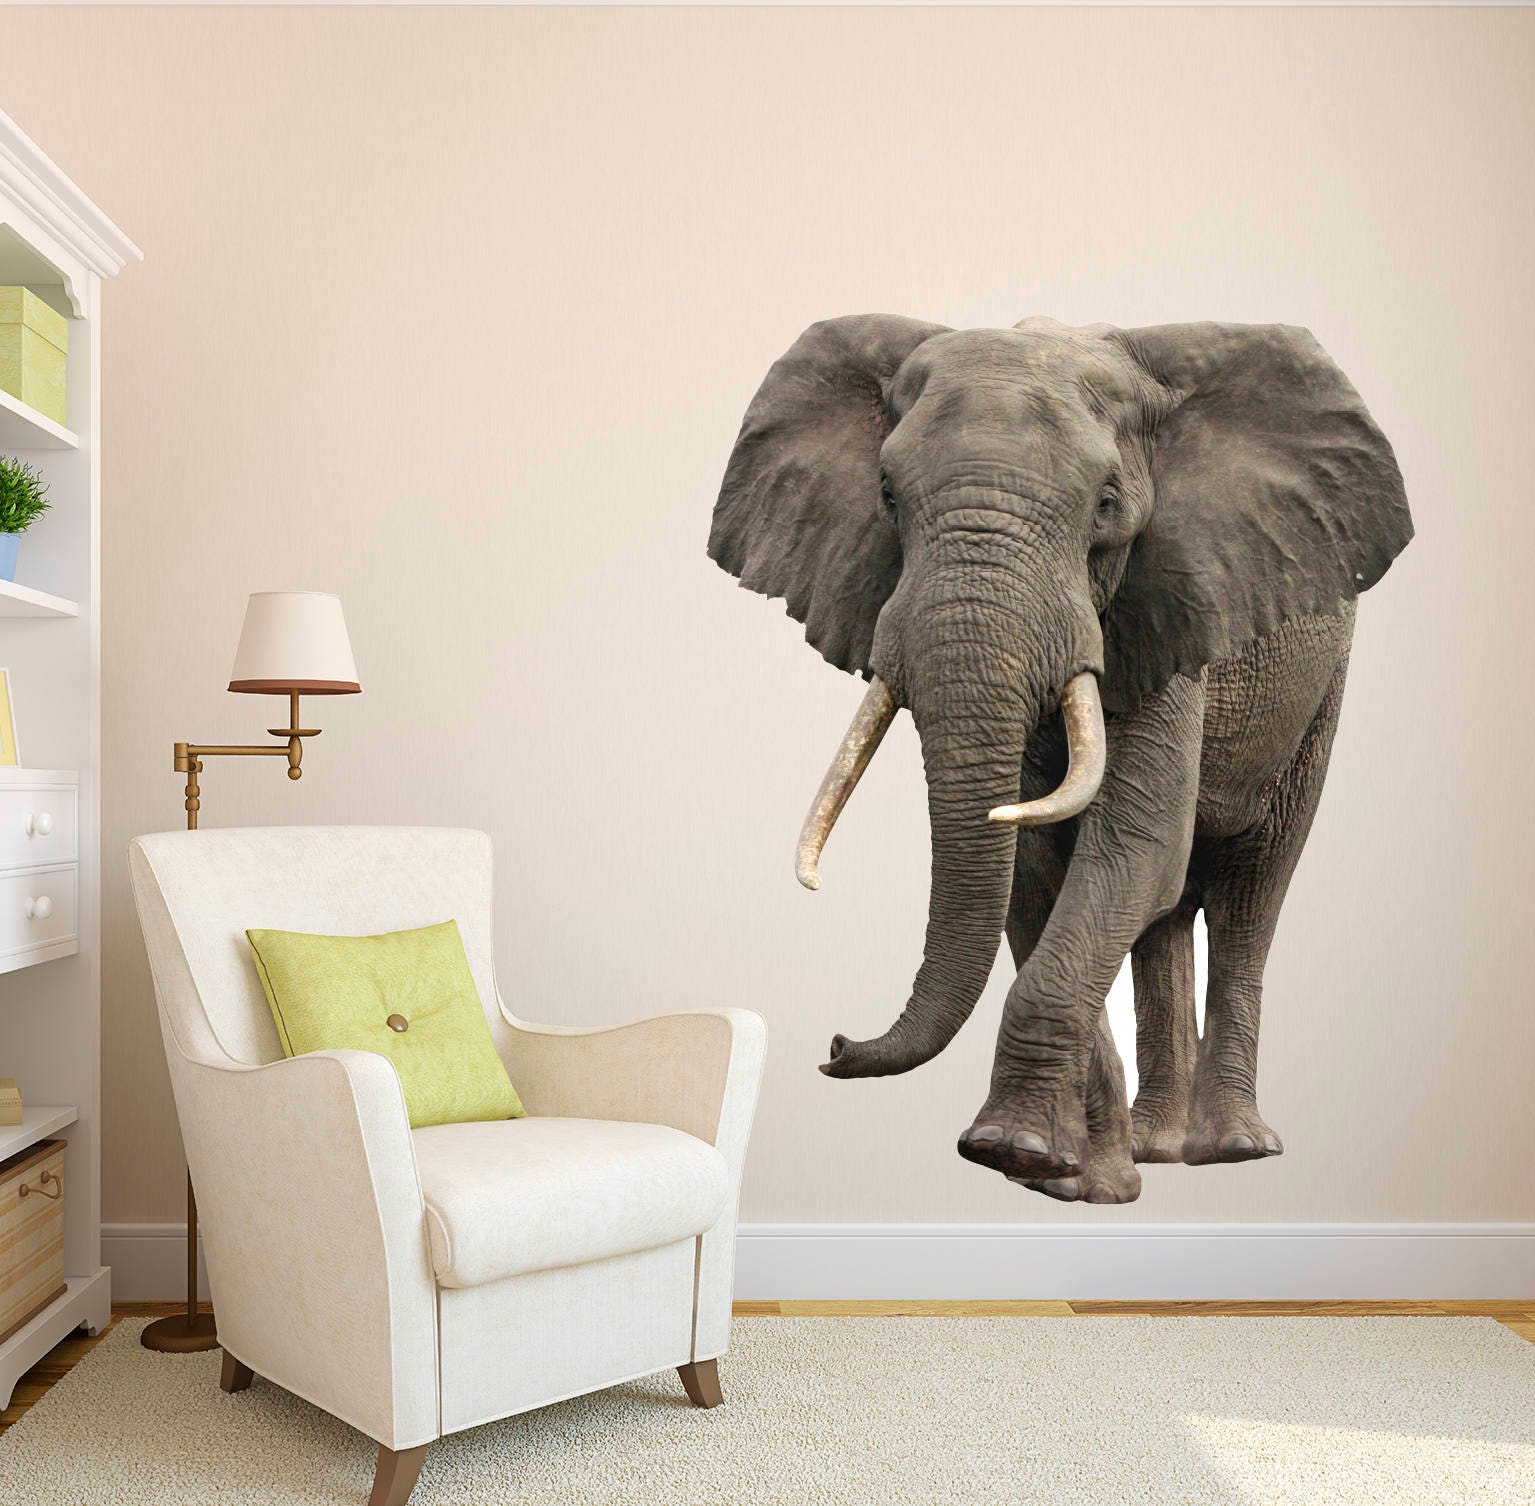 Elephant Wall Tile Stickers Safari Bathroom Decoration Home Wall Tile Decals 